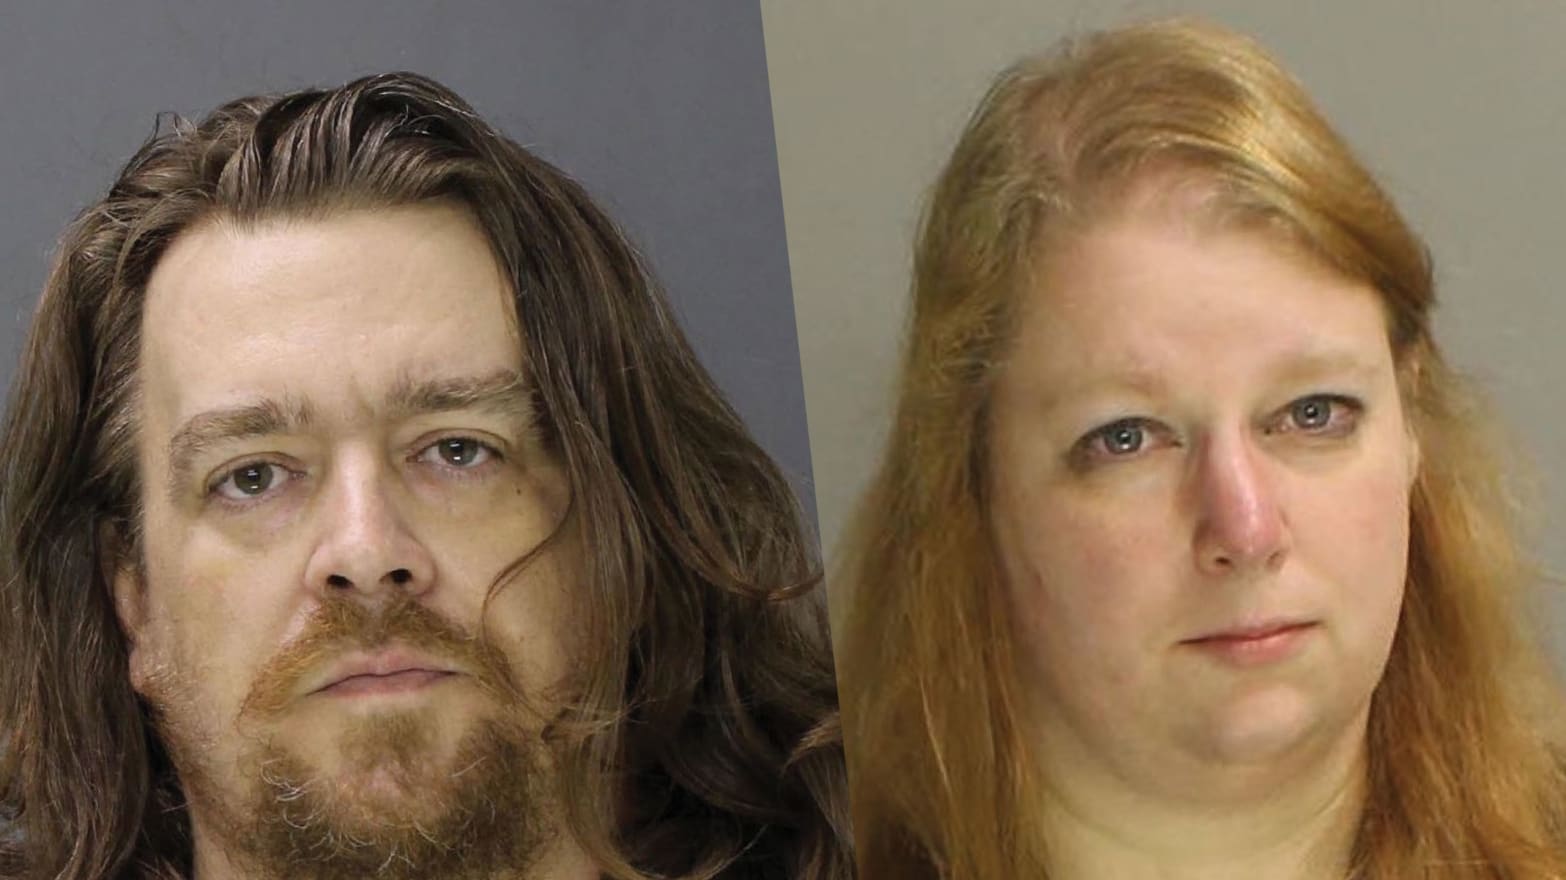 Pennsylvania Couple Raped, Killed, and Chopped Up Disabled Adopted Daughter, Police pic